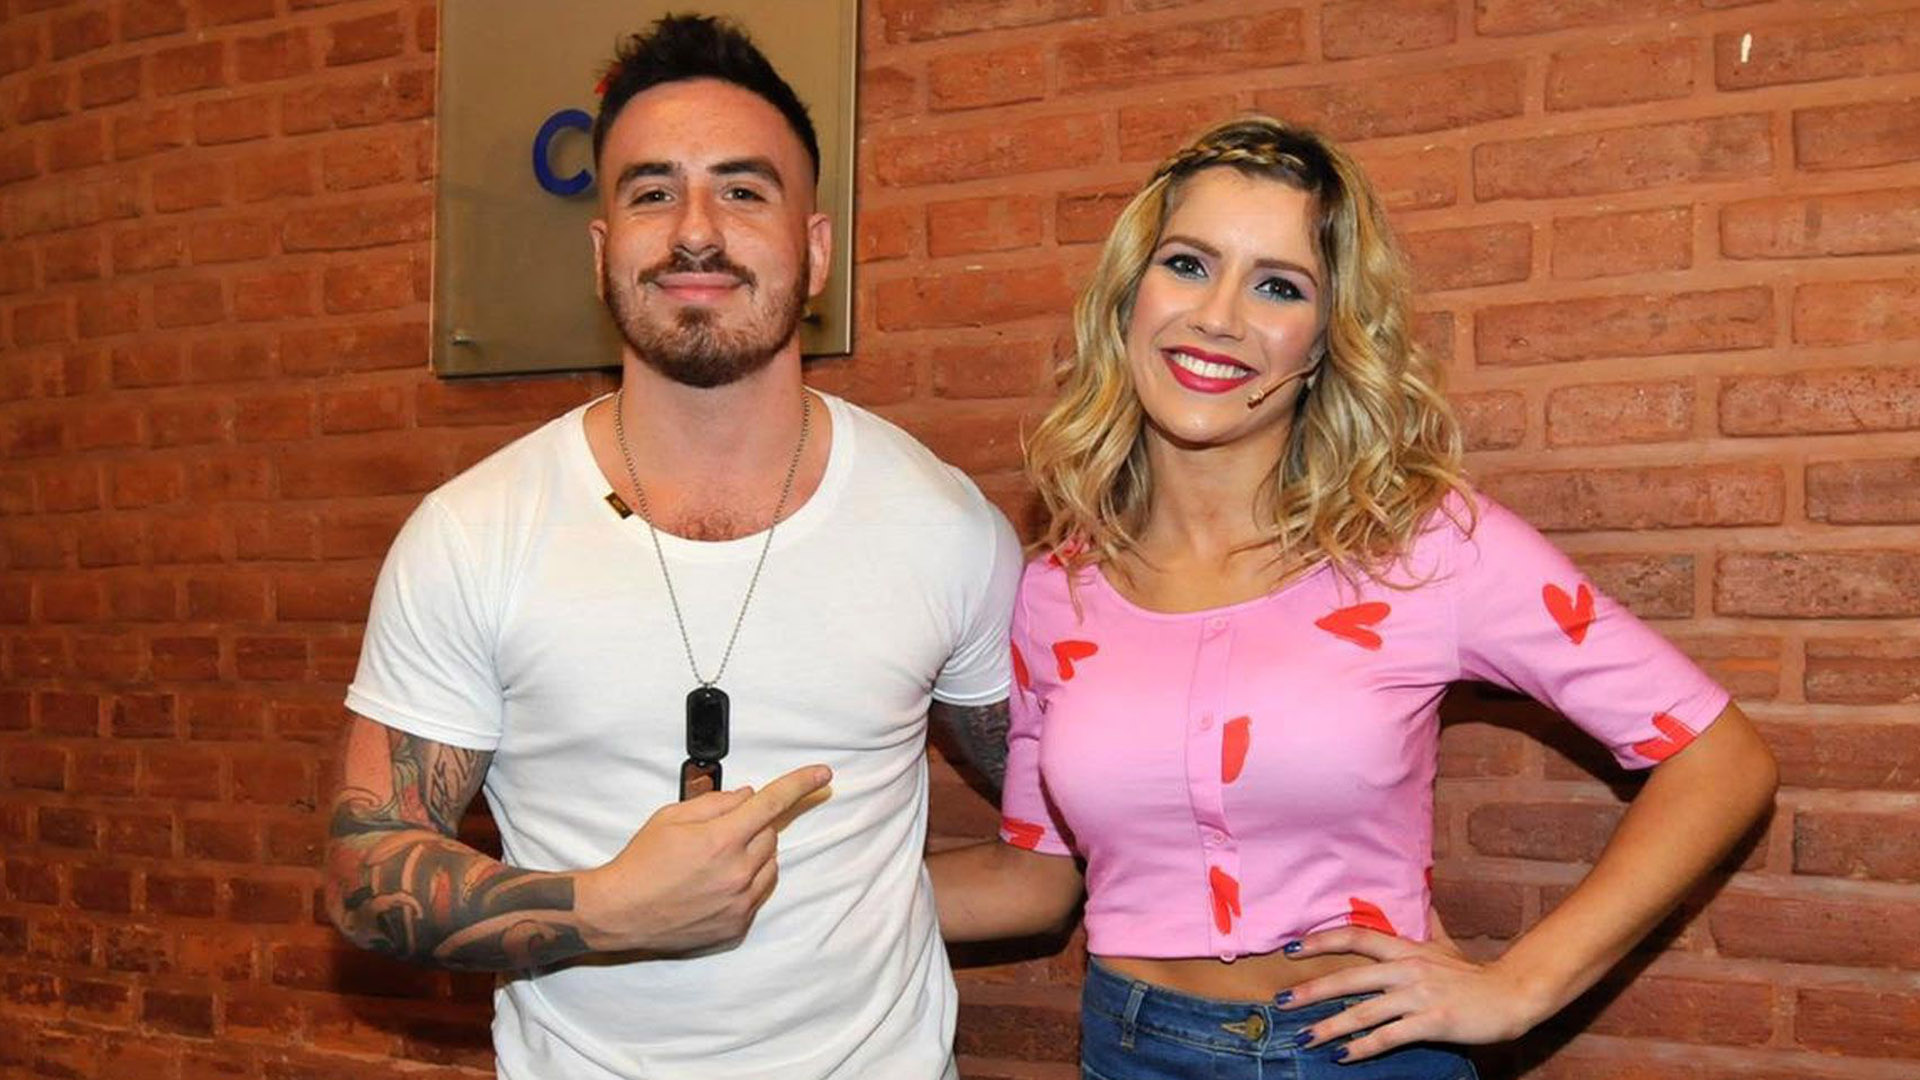 Fede Bal and Laurita Fernández separated in May 2018